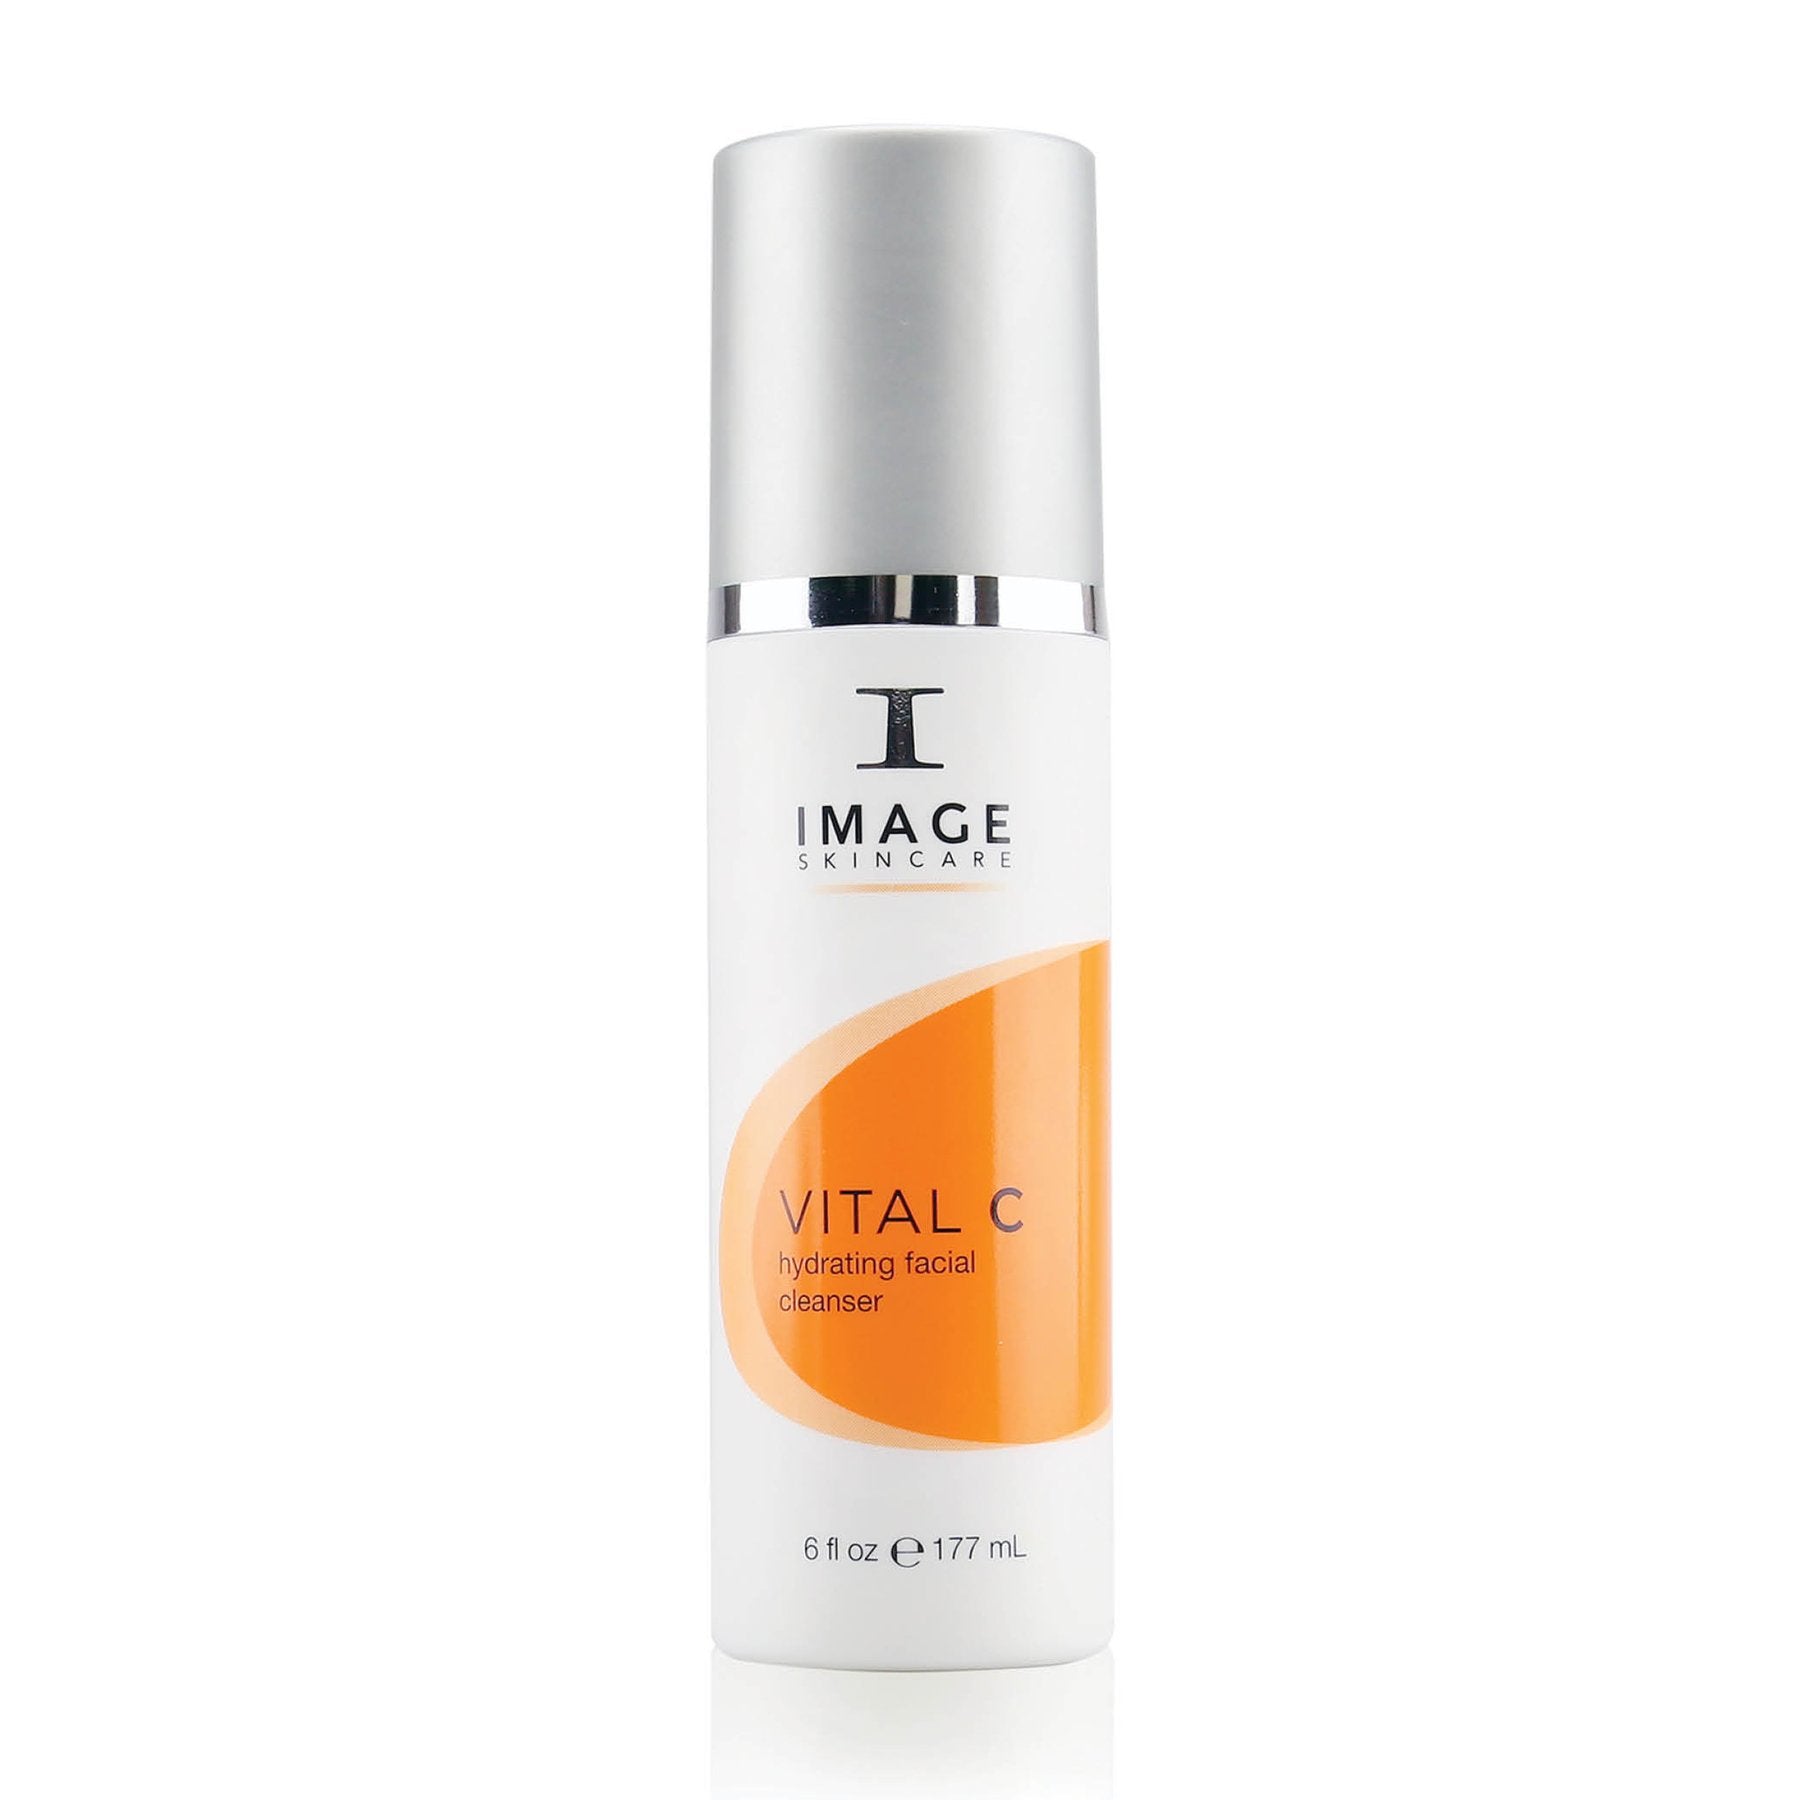 IMAGE - Vital C Hydrating Facial Cleanser